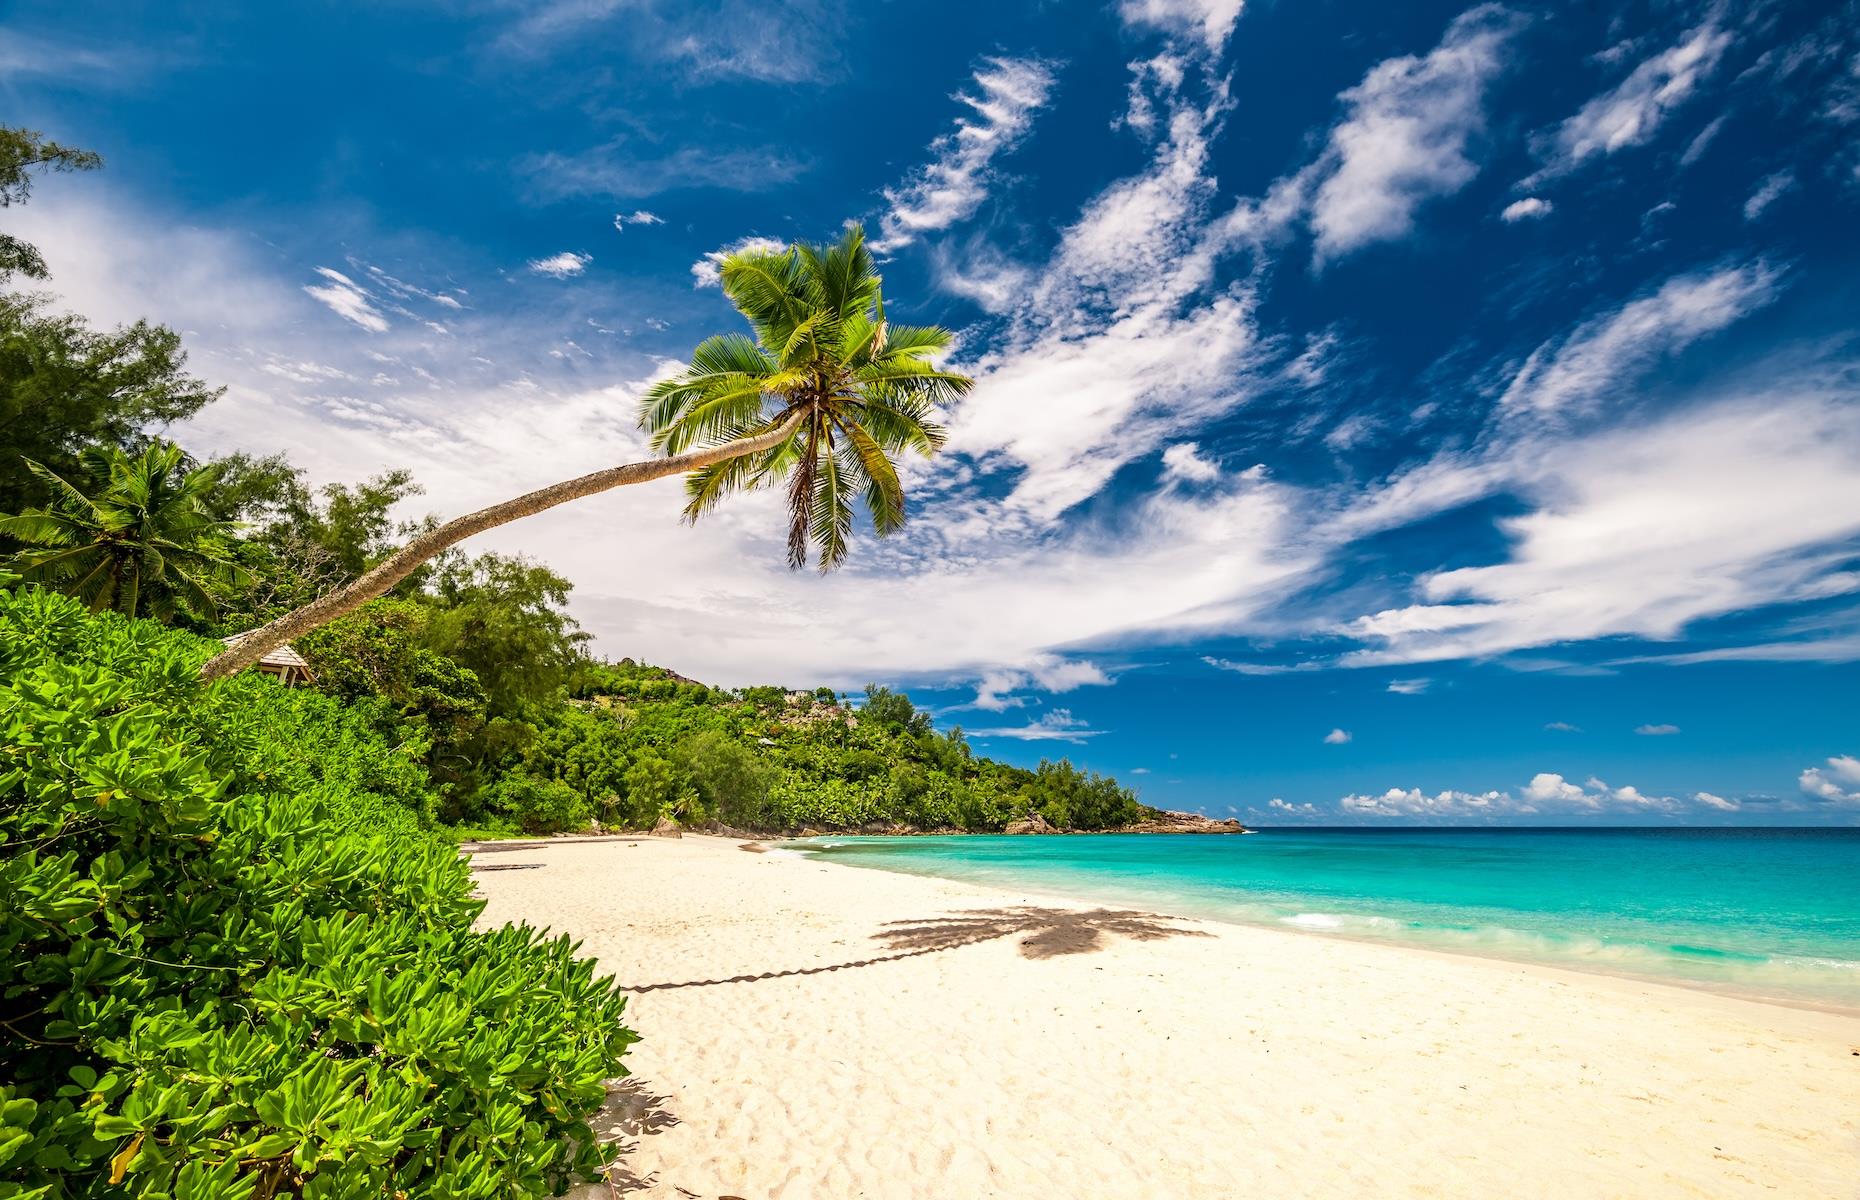 <p>Promising barefoot luxury by the brilliant blue shores of the Indian Ocean, Cheval Blanc Seychelles will be the sixth Cheval Blanc Maison (a LVMH-owned brand) when it opens later this year. Set on the sugary-white Anse Intendance beach (pictured) on Mahe Island’s southwest coast, the boutique beach hotel is the work of architect Jean-Michel Gathy, who is seeking to capture the country’s Creole heritage in the design. Flawless facilities including a stunning spa and five dining venues are on the agenda for this tropical enclave, which will also have 52 large villas, with a beach, hillside or jungle setting and private pools.</p>